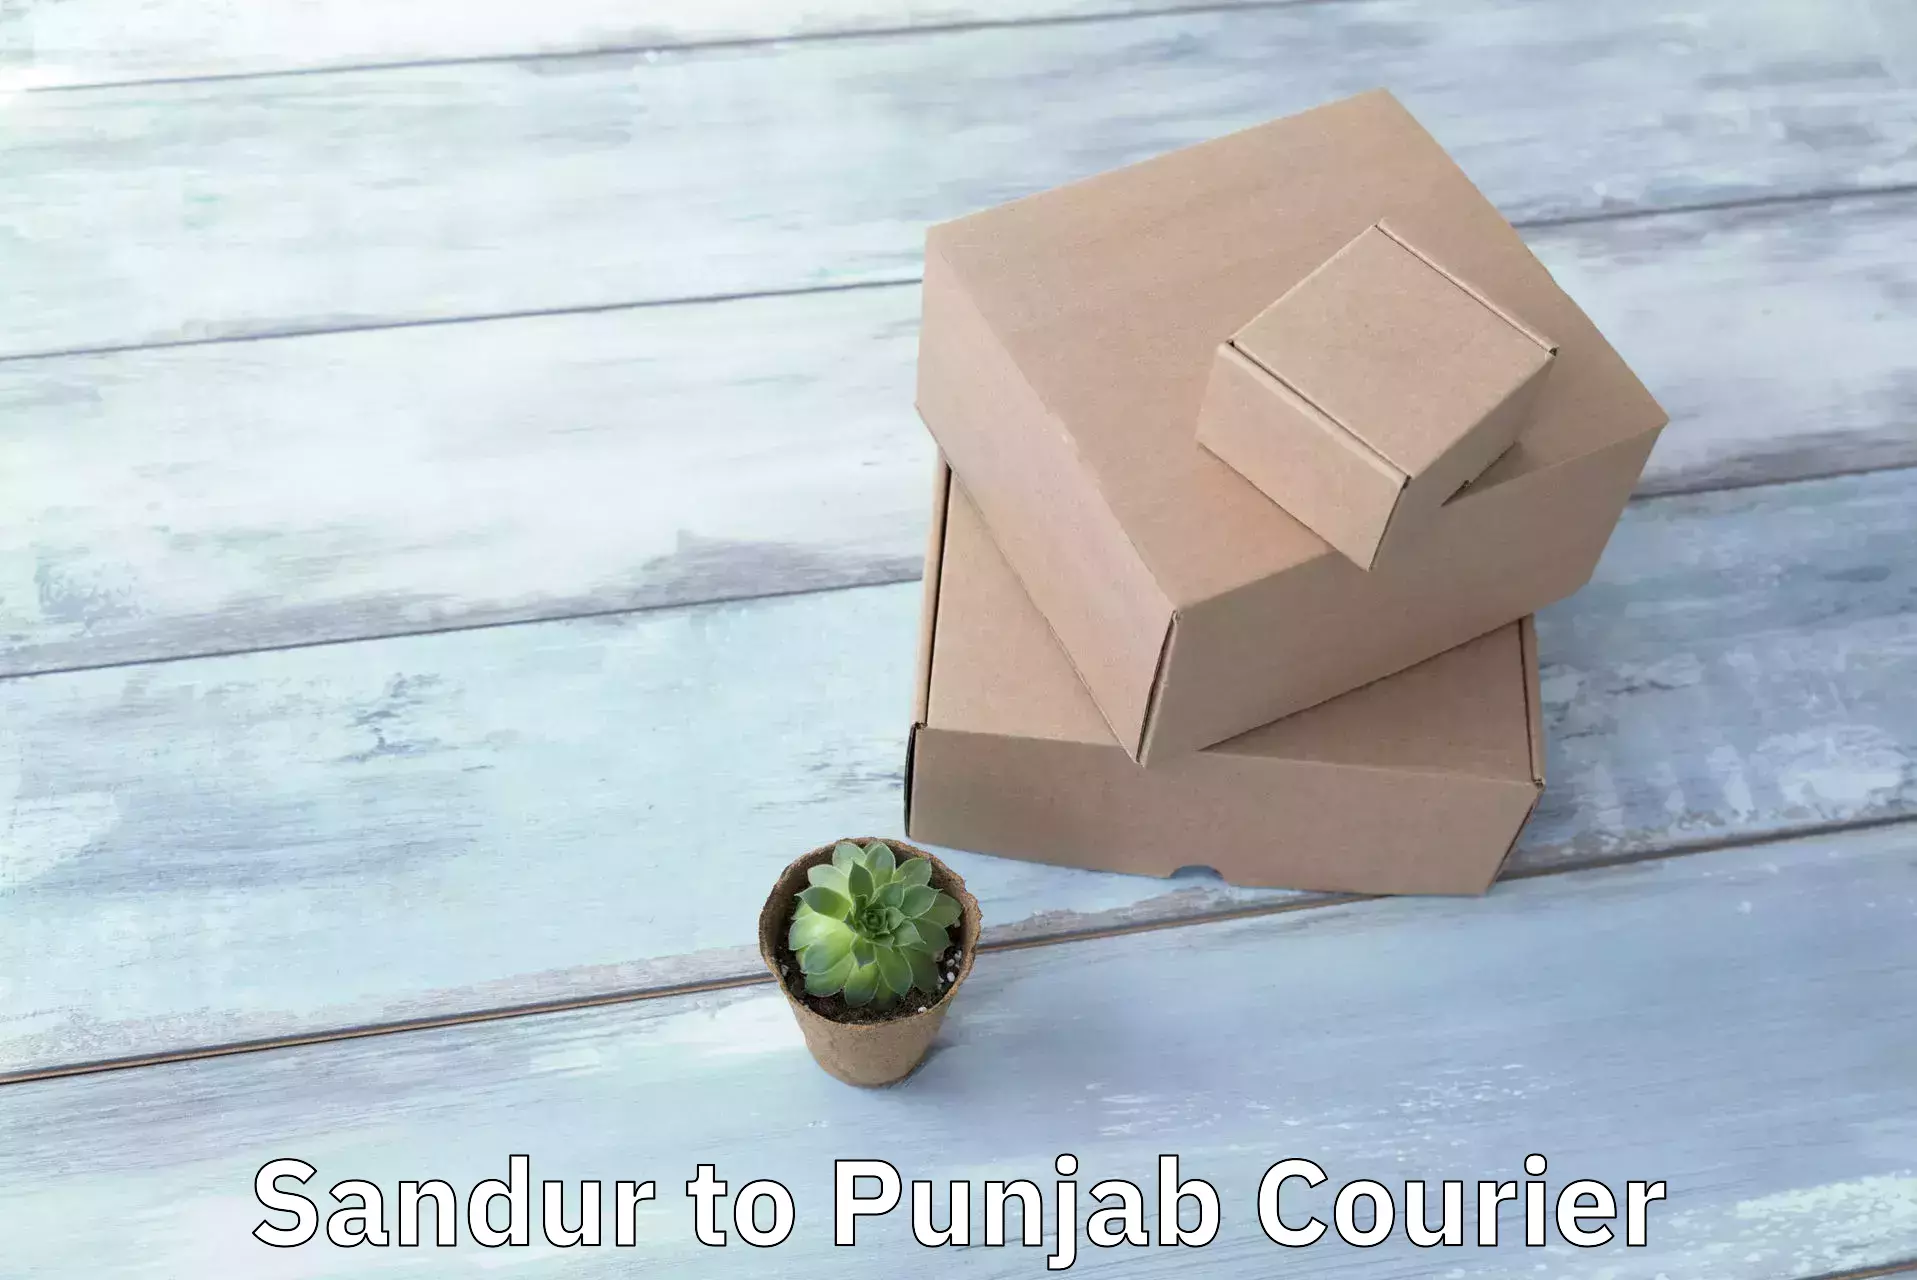 Flexible delivery schedules Sandur to Punjab